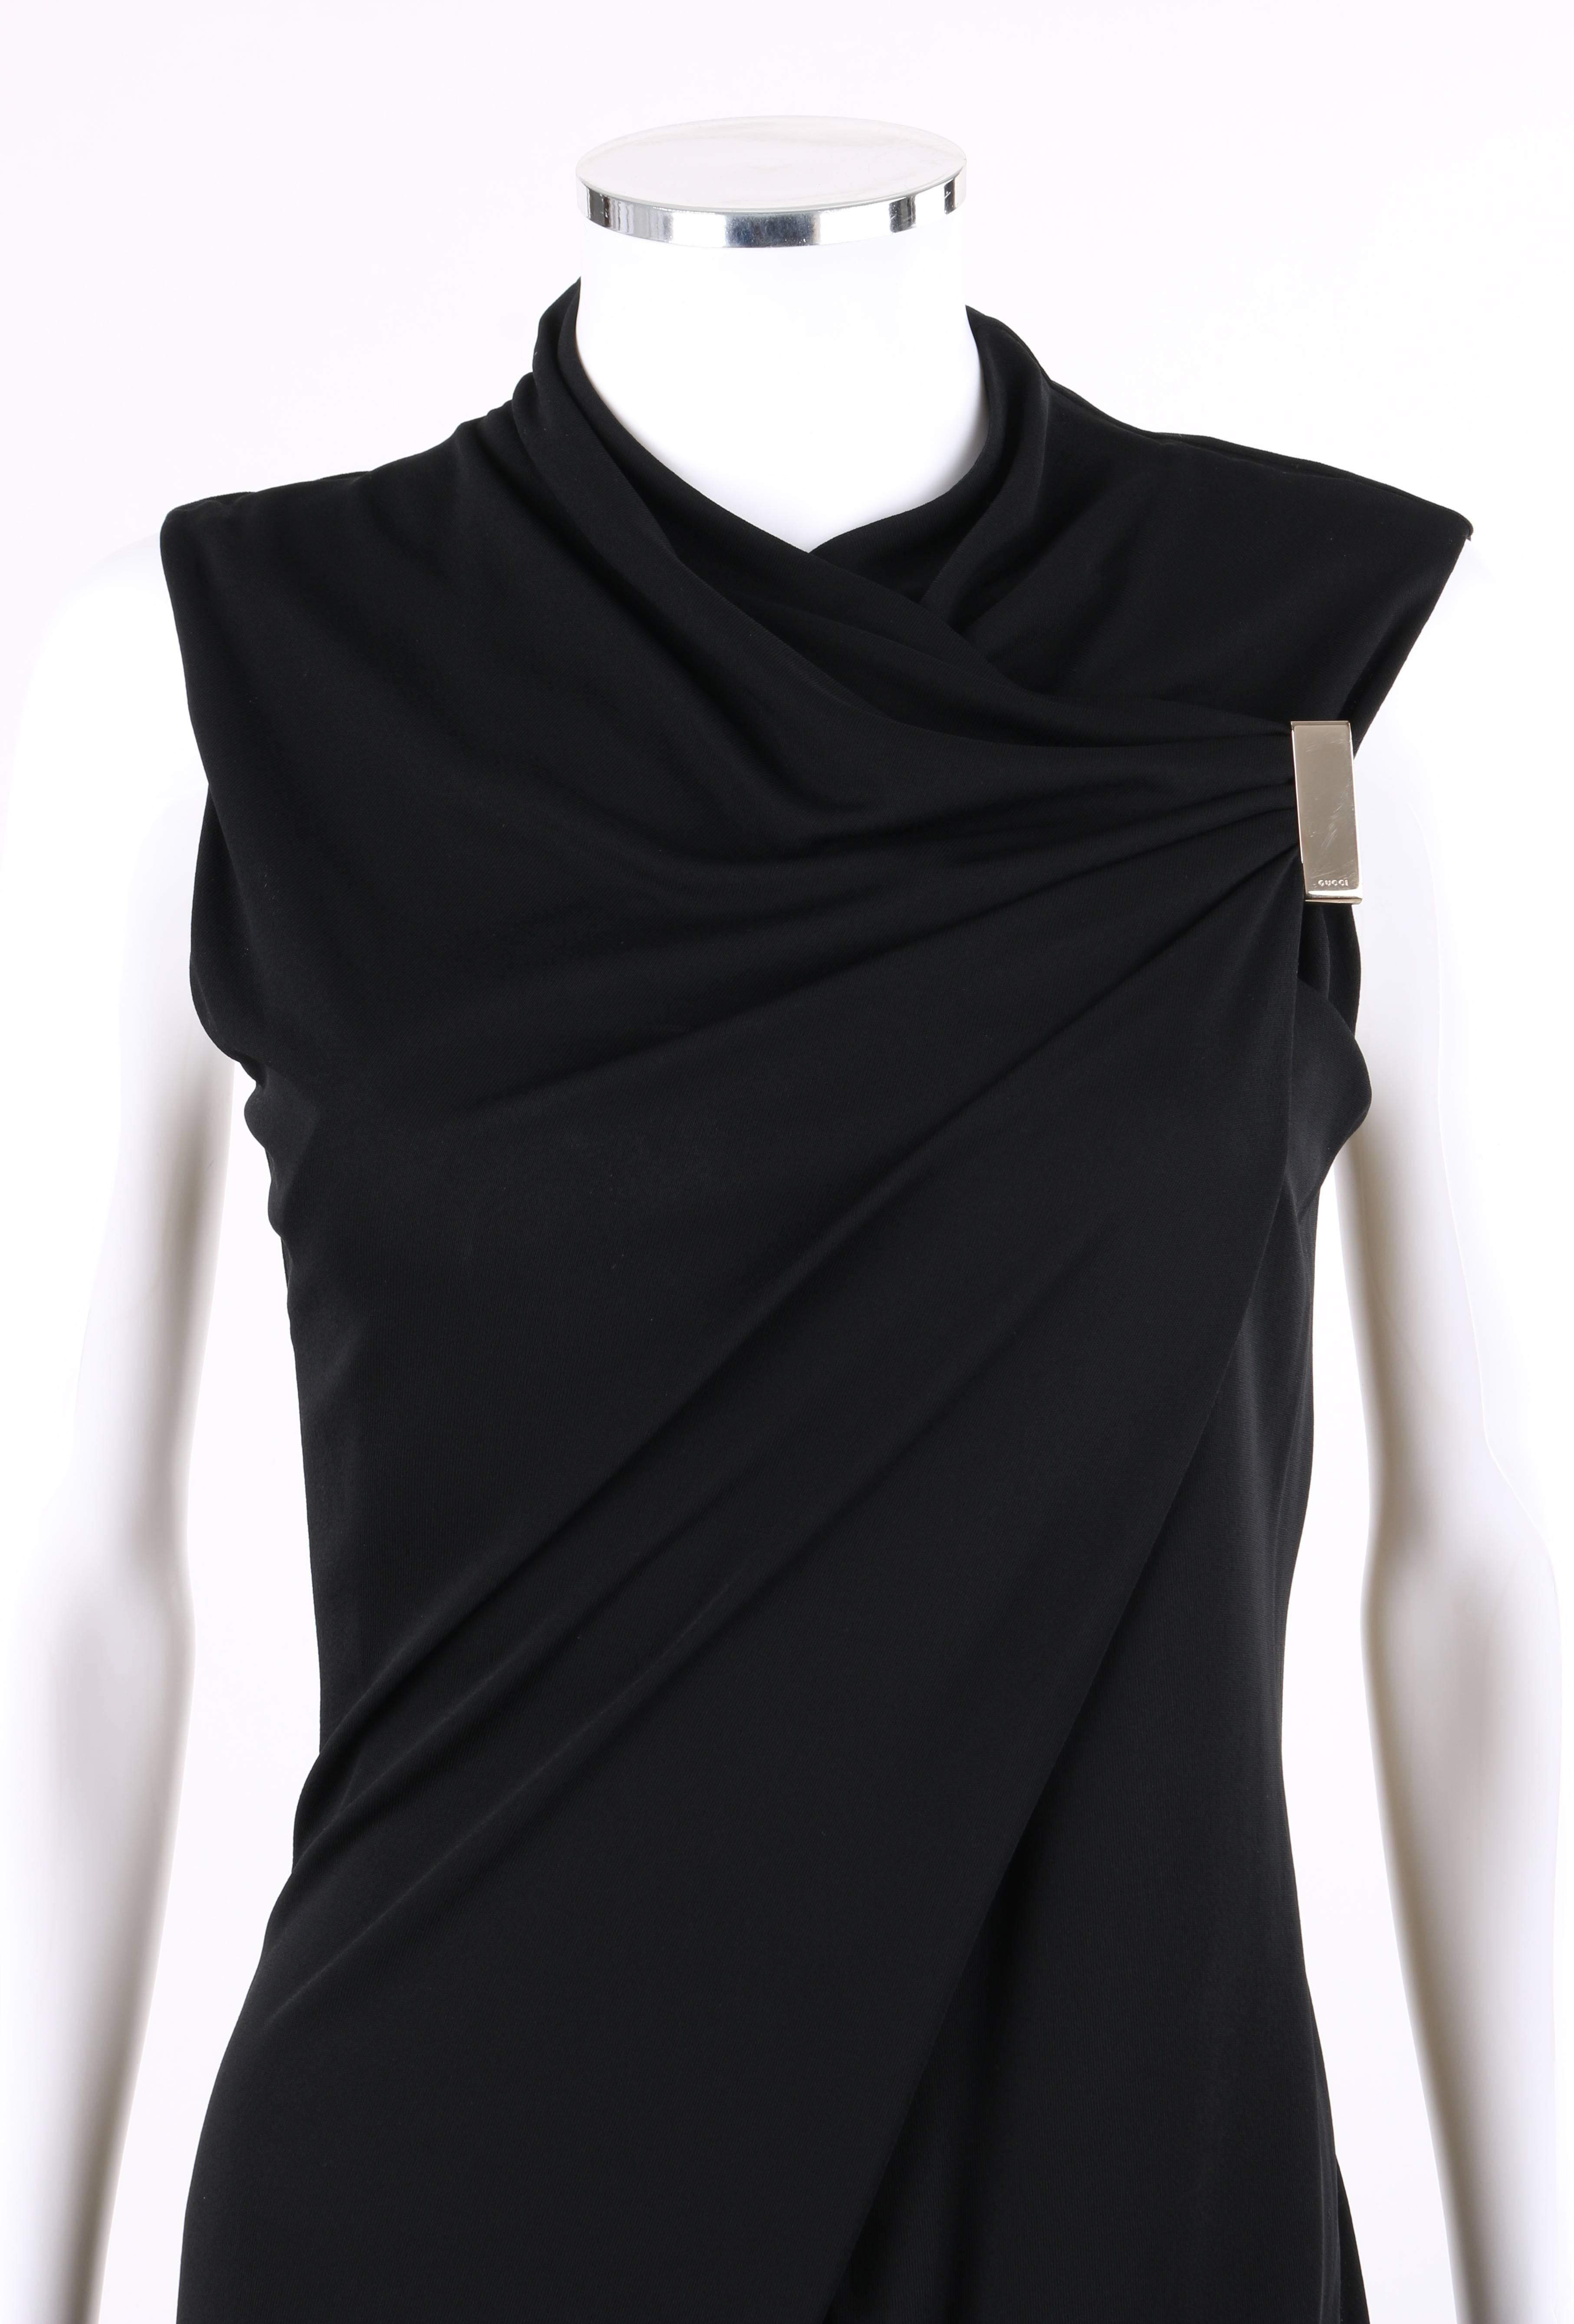 GUCCI Black Jersey Knit Sleeveless Draped Shift Cocktail Dress In Good Condition For Sale In Thiensville, WI